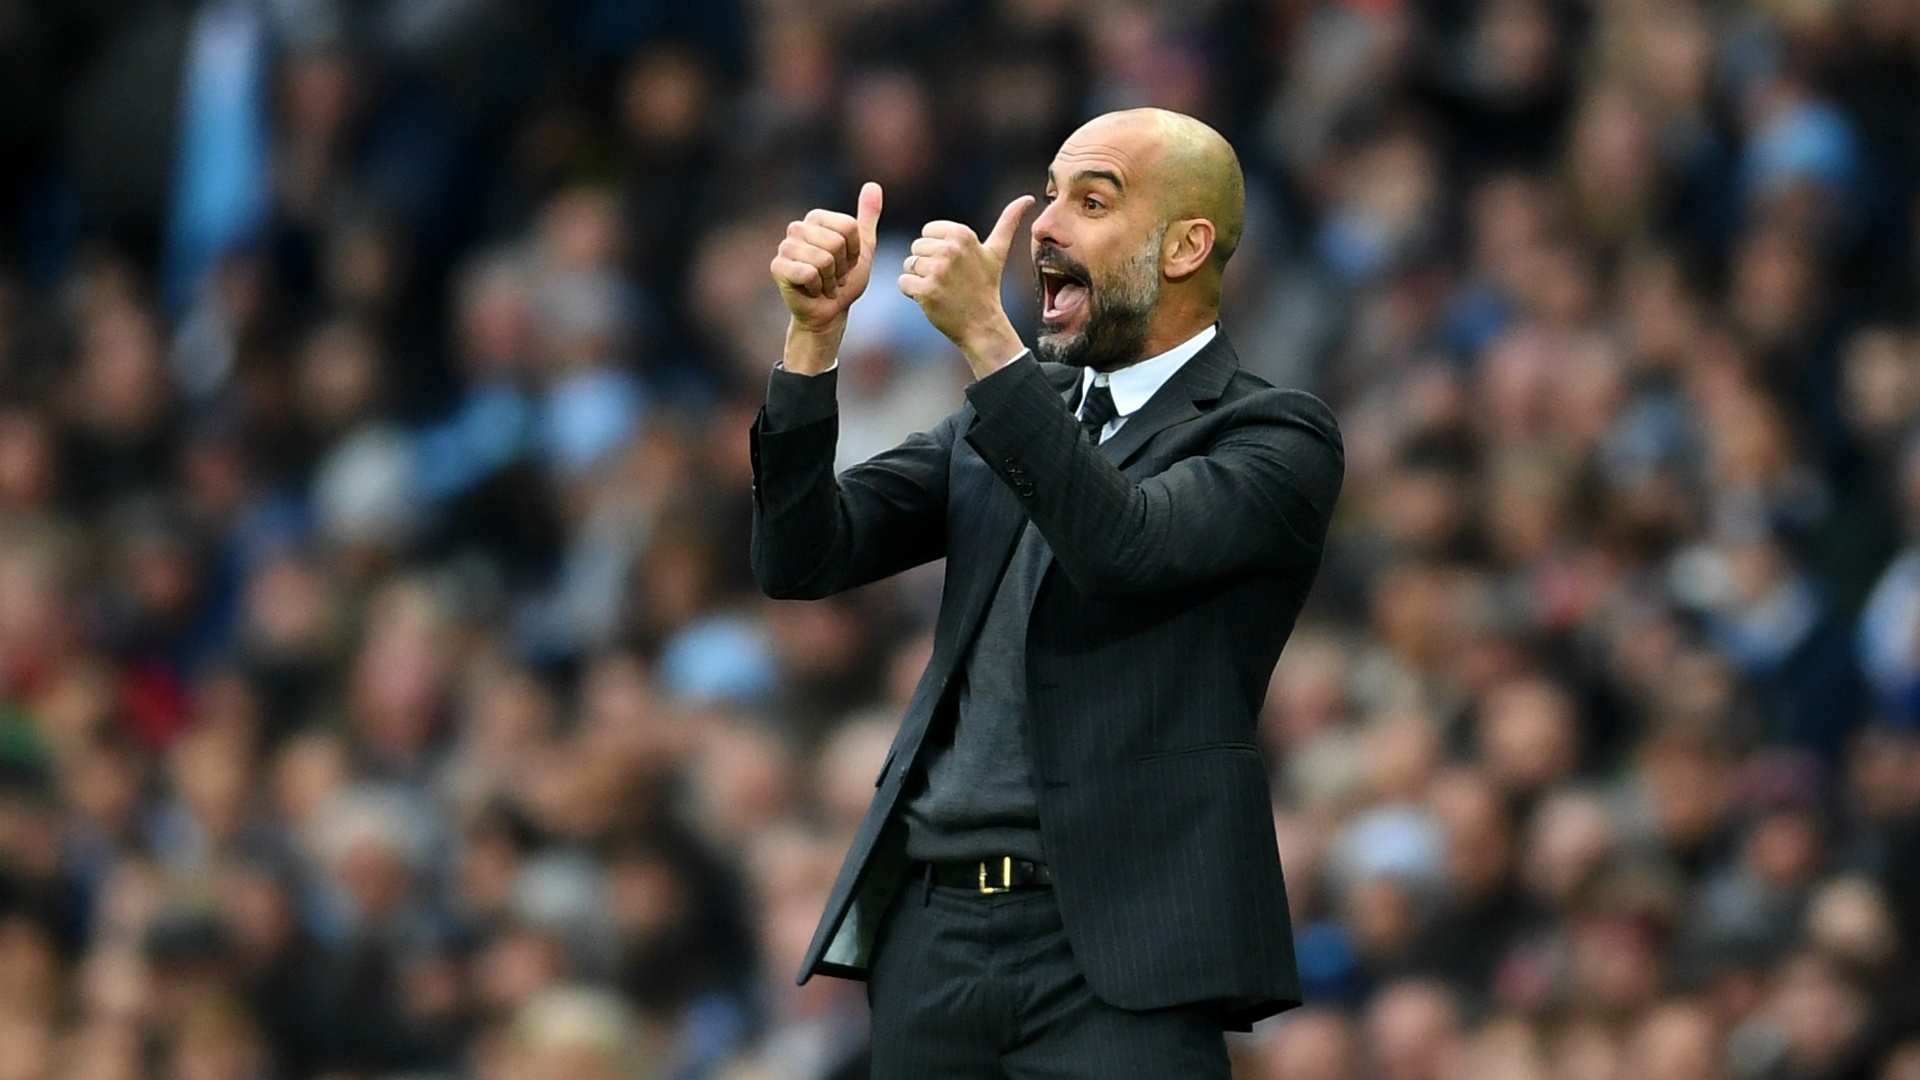 'Man City are arrogant & not as good as Guardiola thinks'